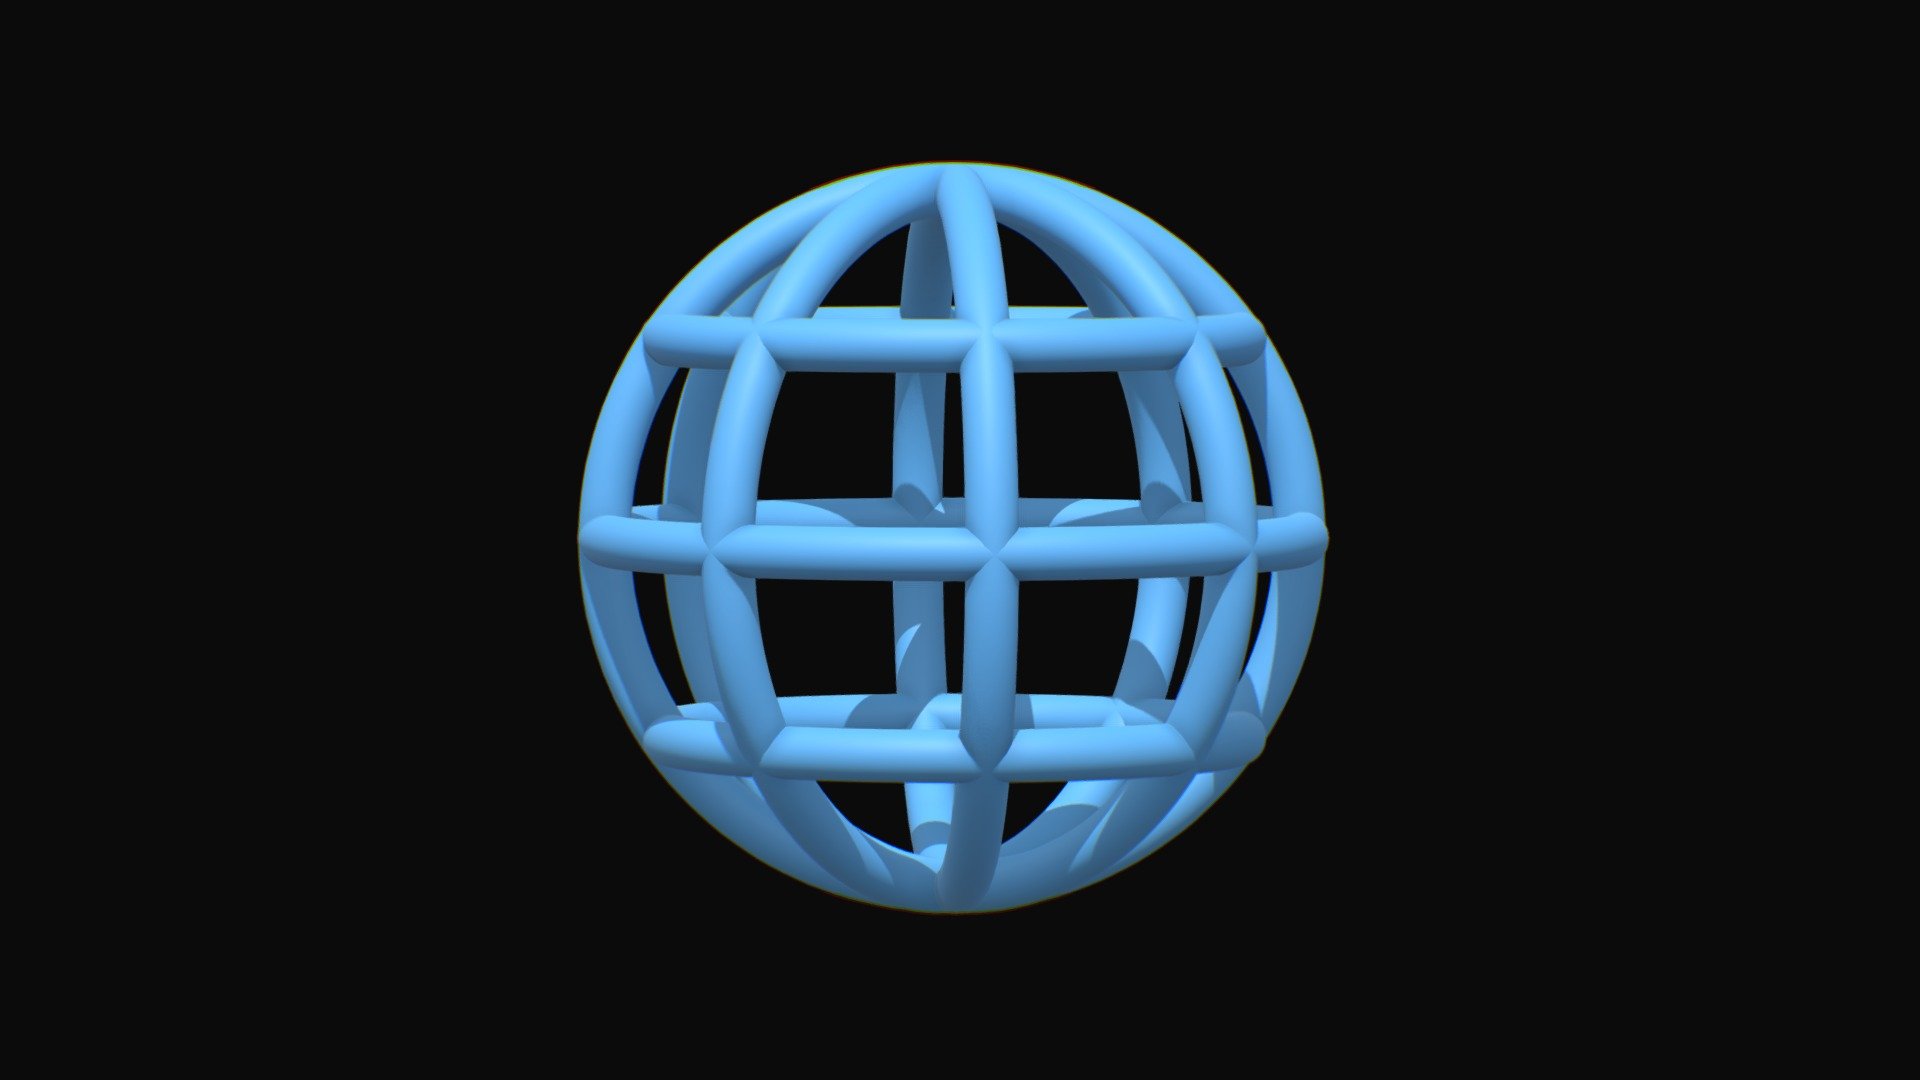 Globe with Meridians (3D Icon) - Globe with Meridians (3D Icon) - Download Free 3D model by Alexander (@pravdin) 3d model